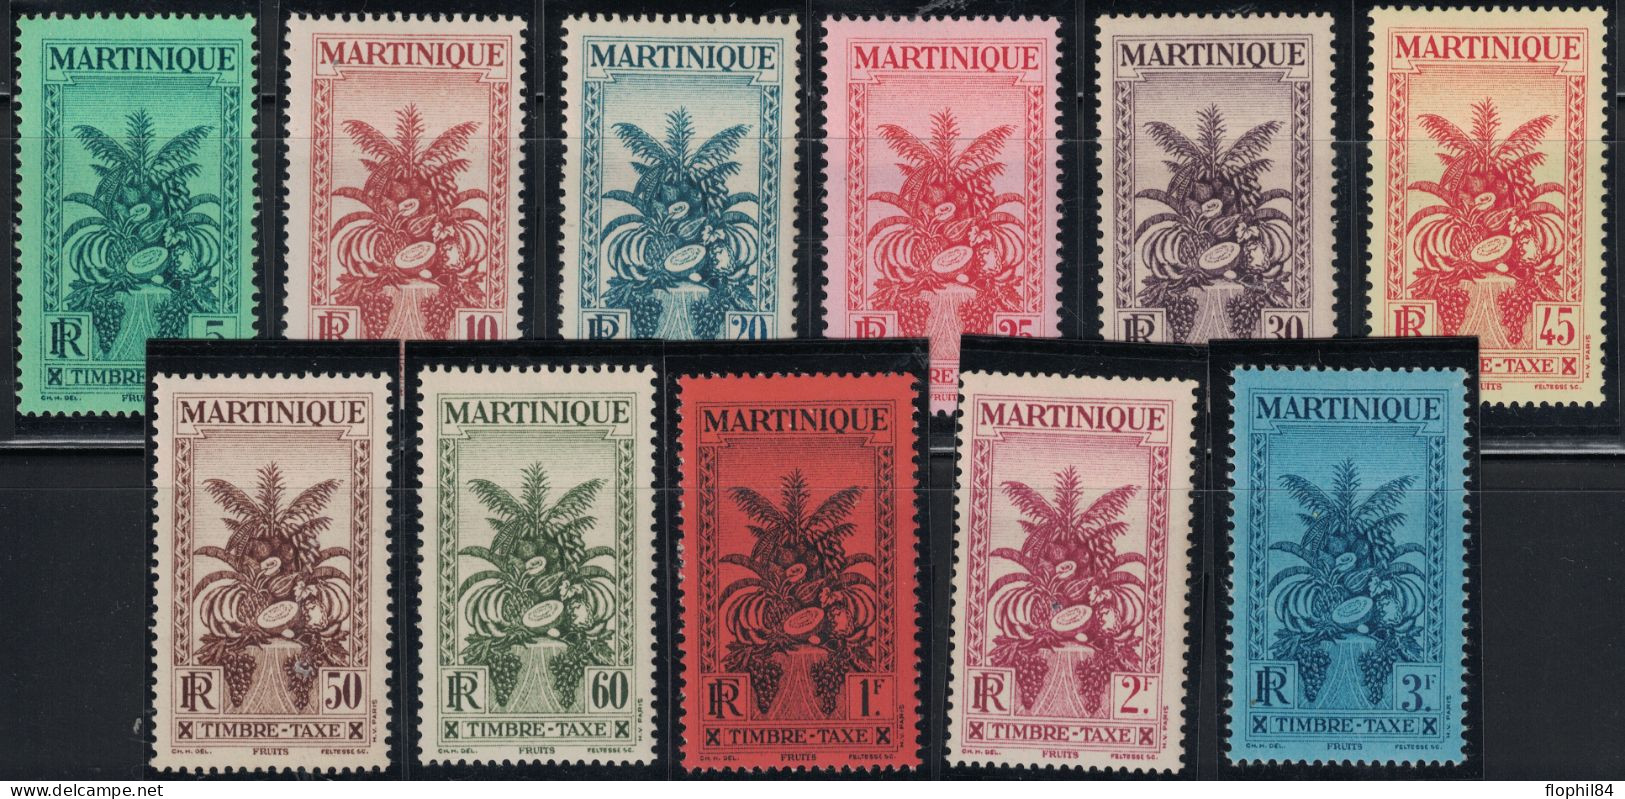 MARTINIQUE - TAXE - SERIE N°12 A 22 - NEUF SANS TRACE DE CHARNIERE - COTE 38€. - Strafport